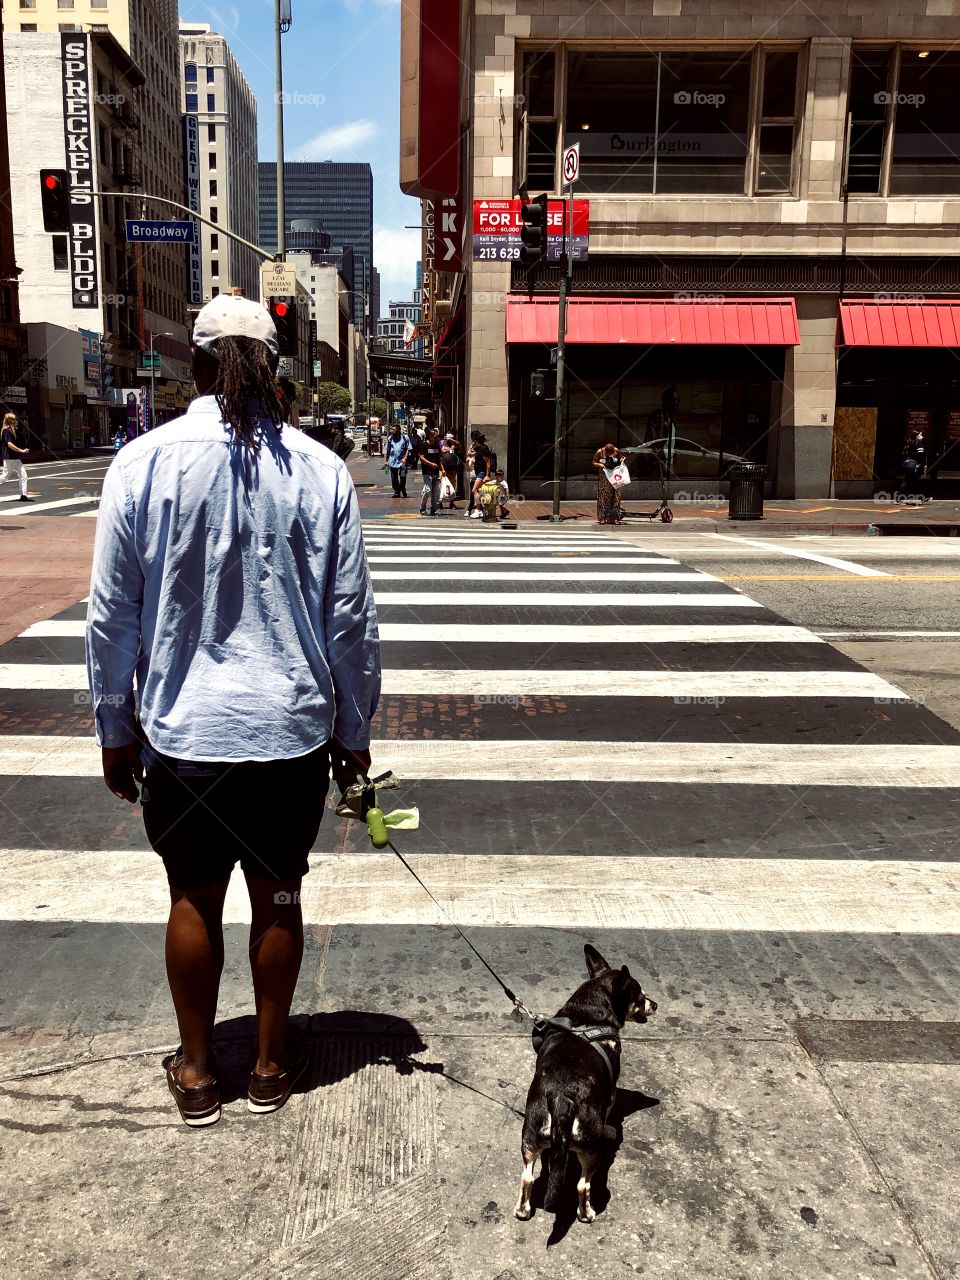 A large man with a small dog waits at the crosswalk at a red light on Broadway in Downtown Los Angeles CA 6.12.2020